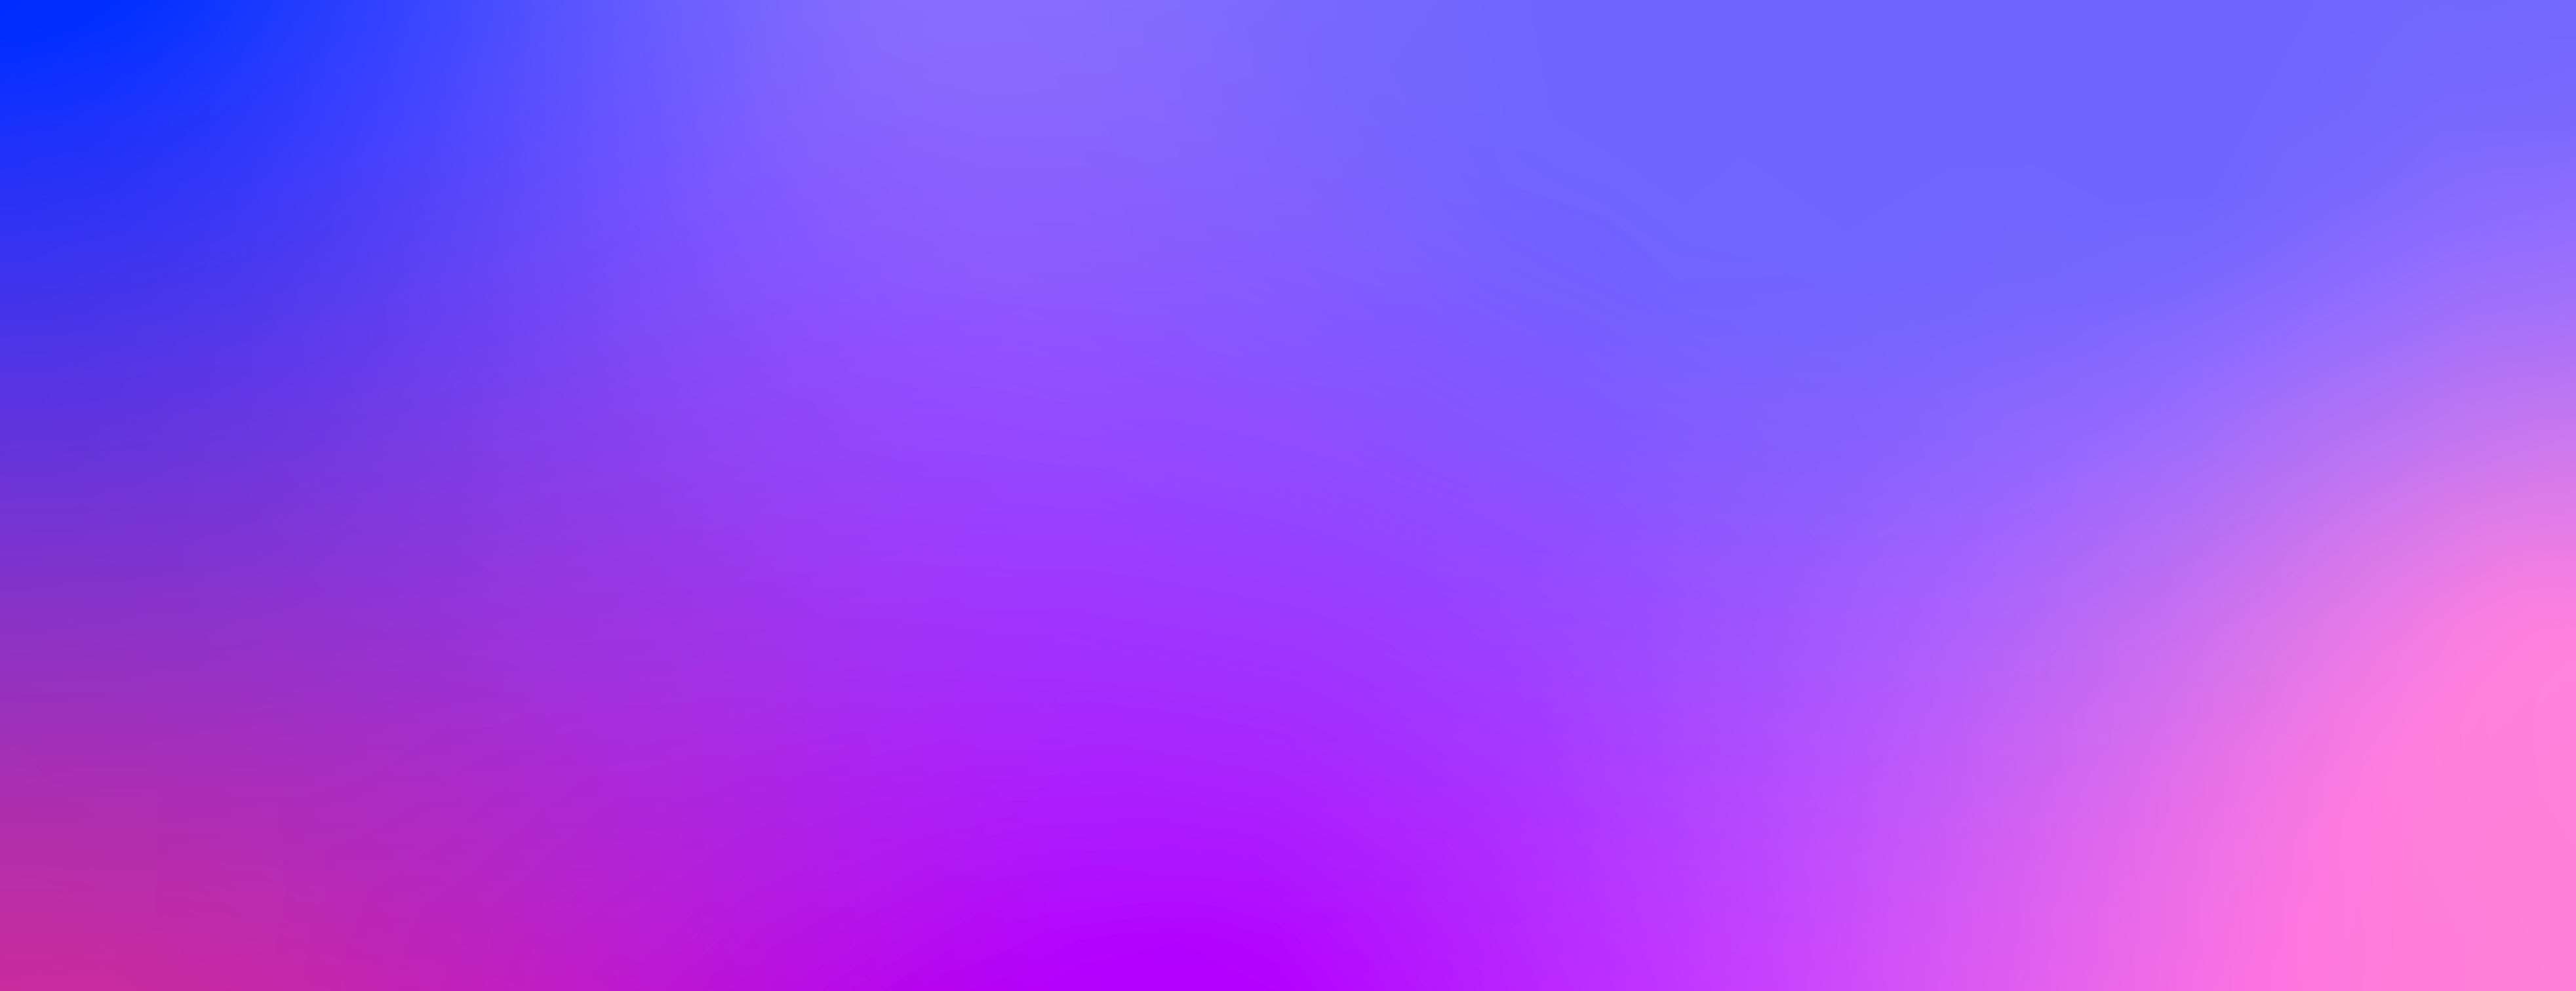 purple and pink gradient background